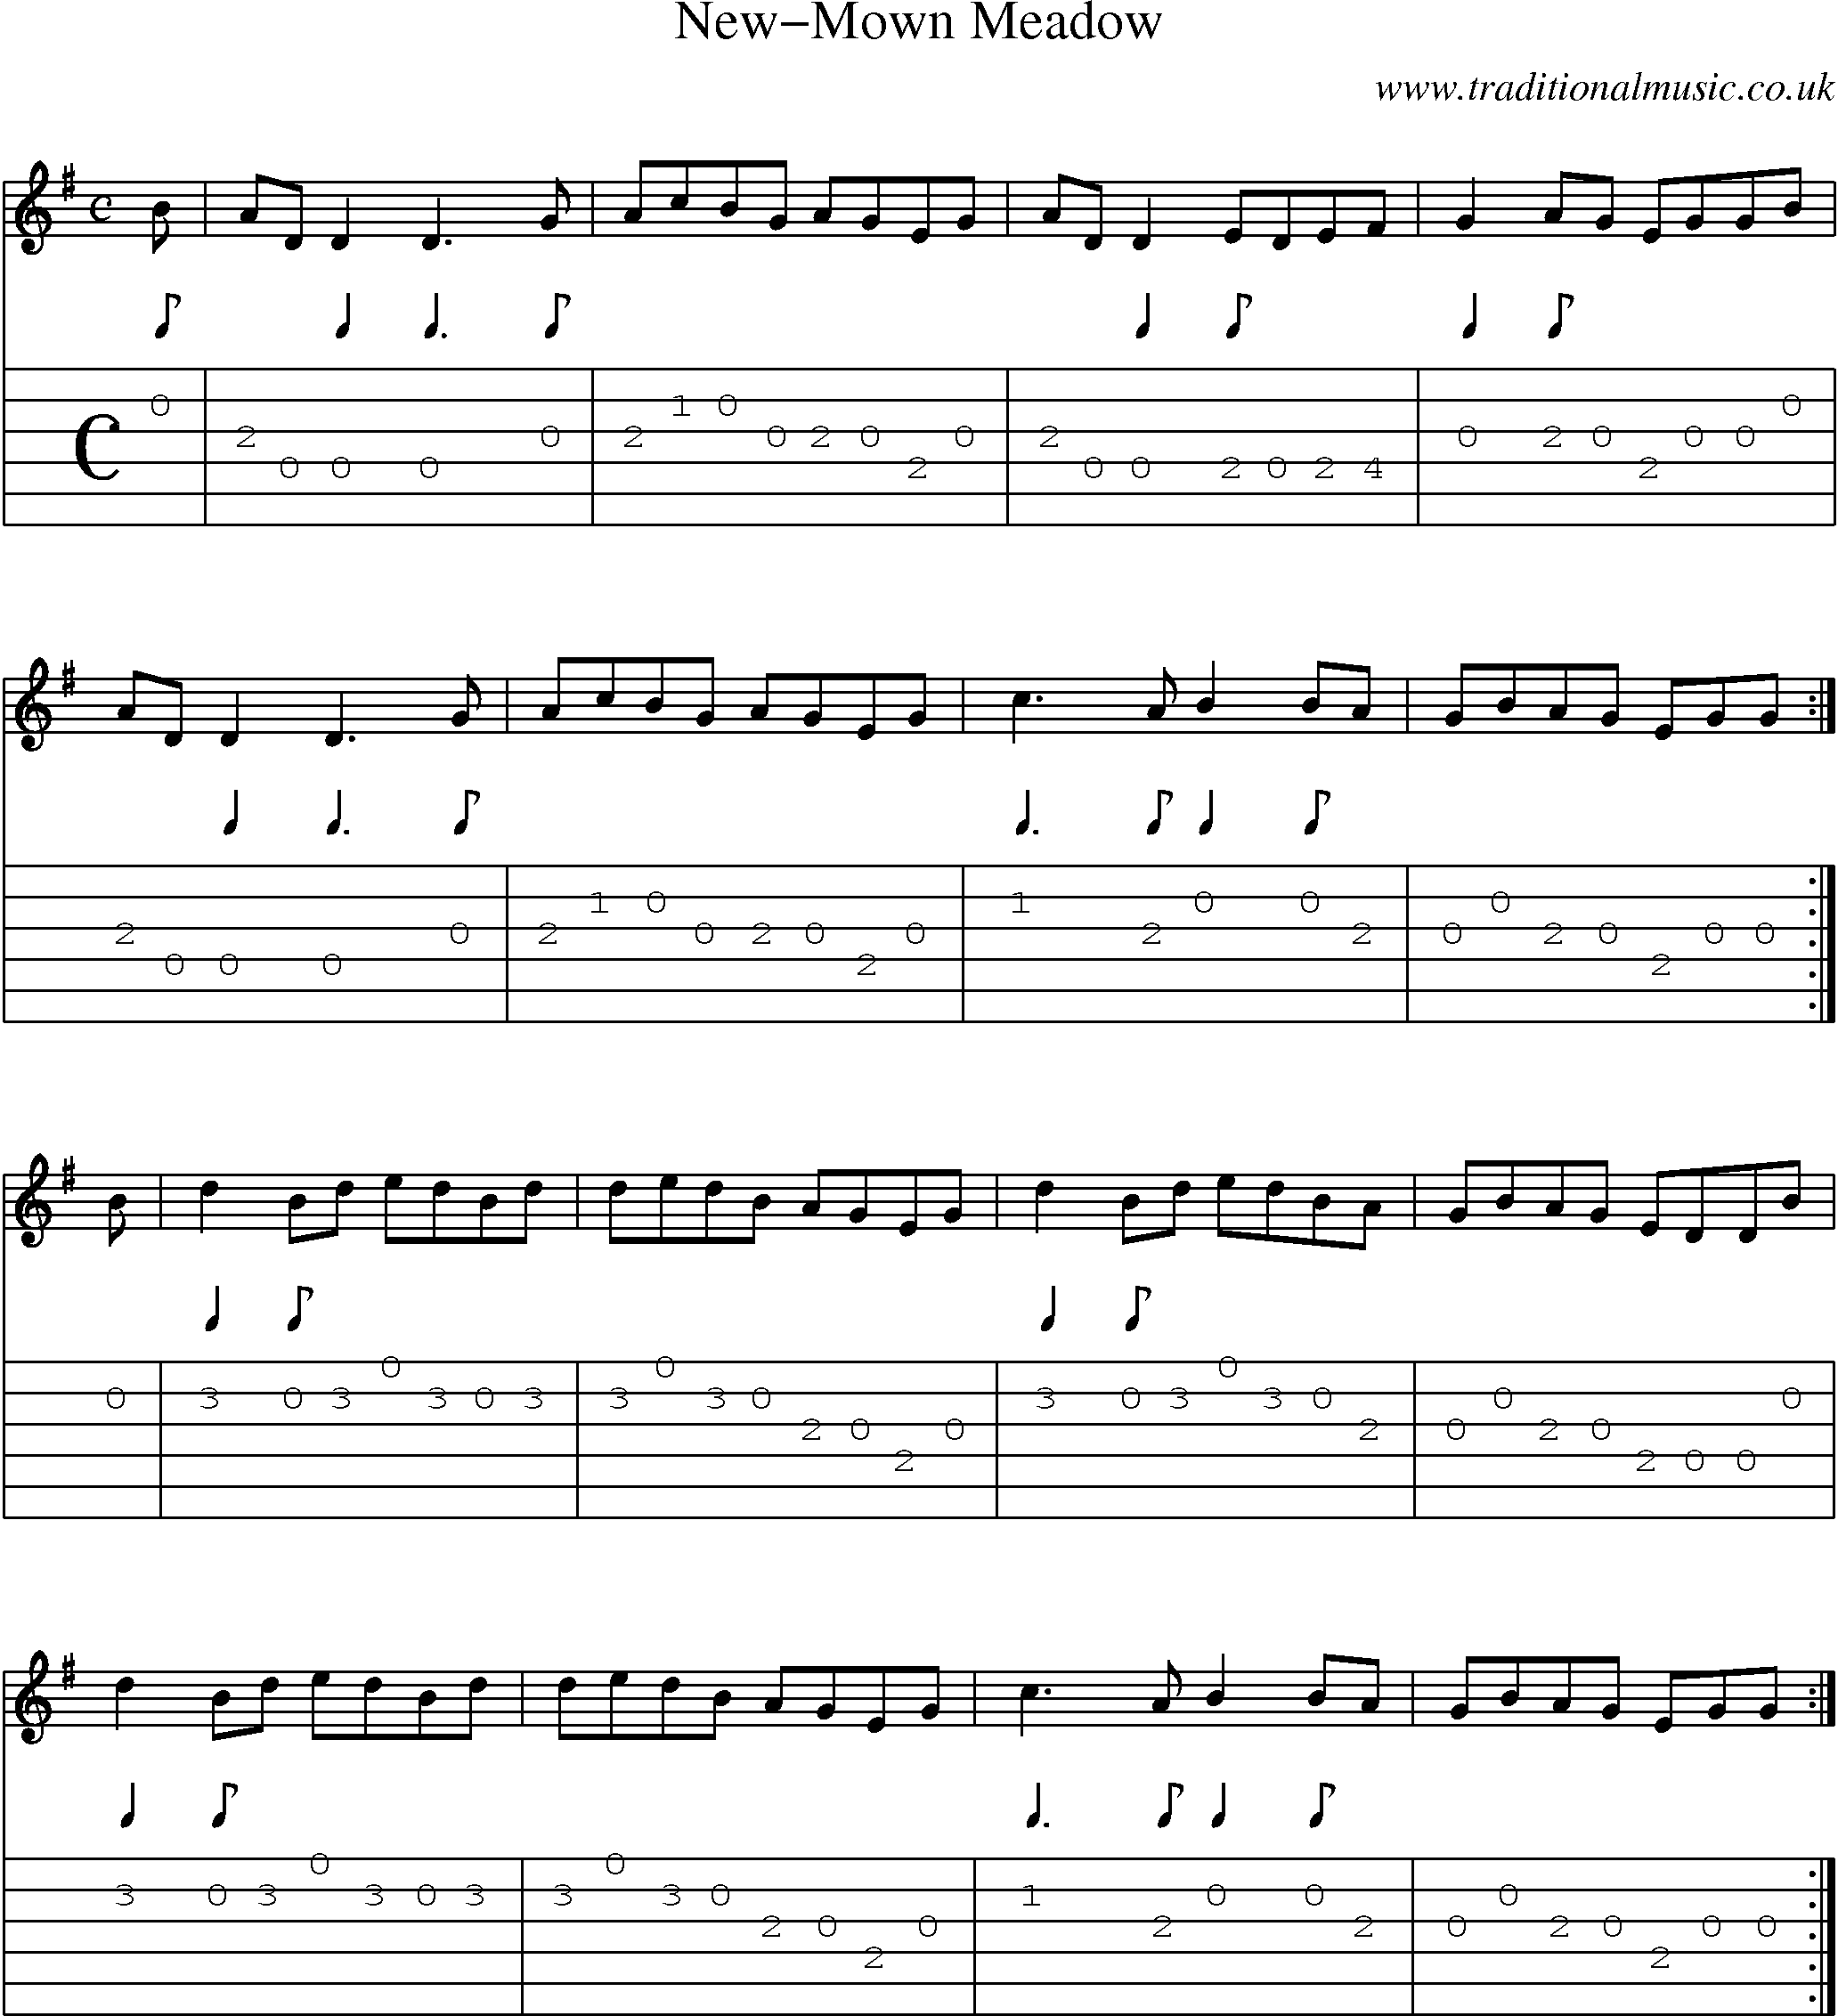 Music Score and Guitar Tabs for Newmown Meadow